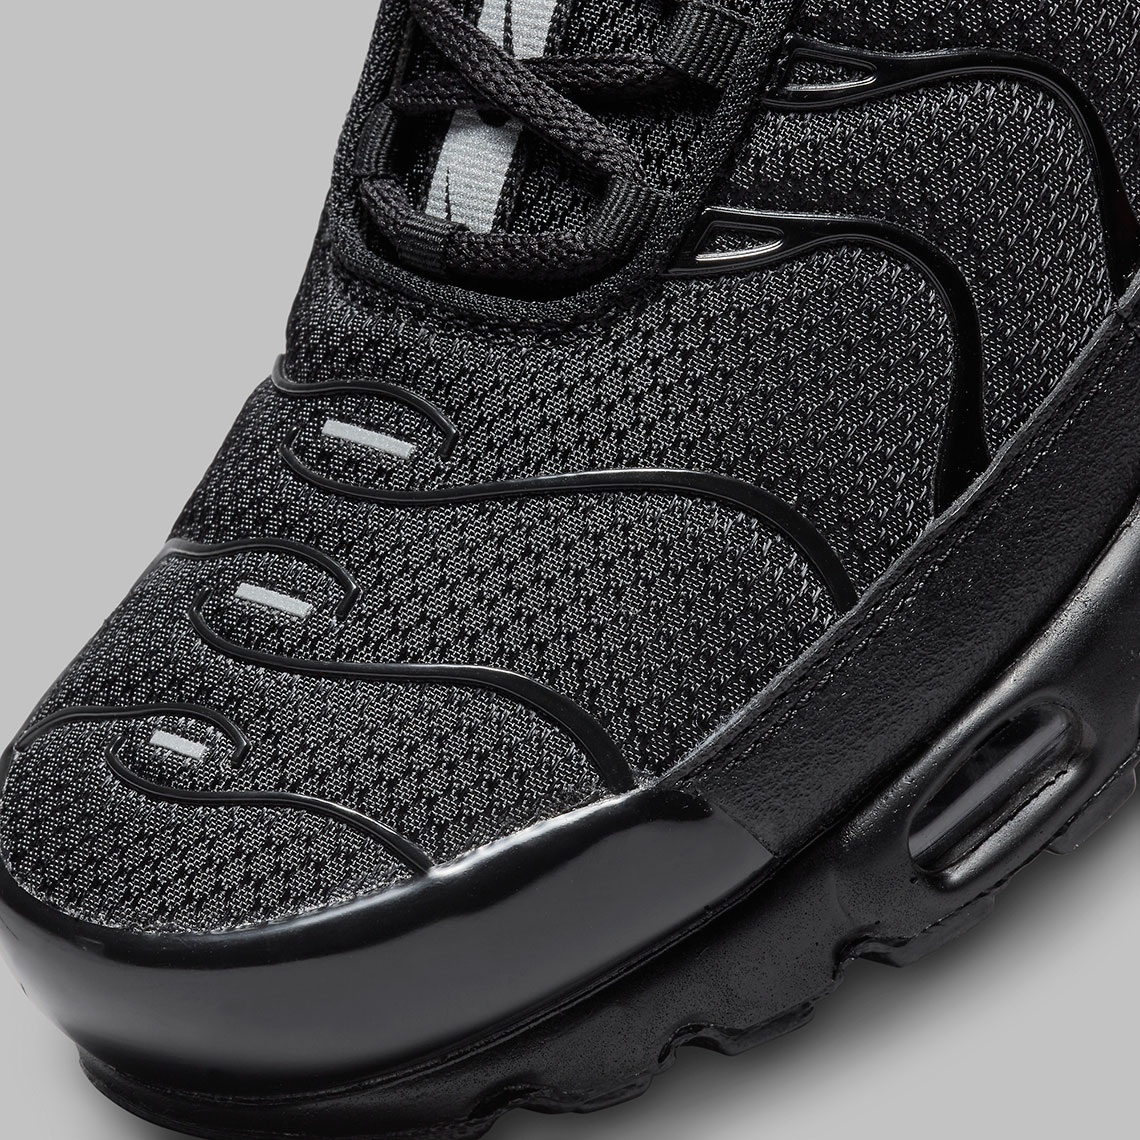 Nike Air Max Plus Black Silver Dx8971 001 Release Date 5